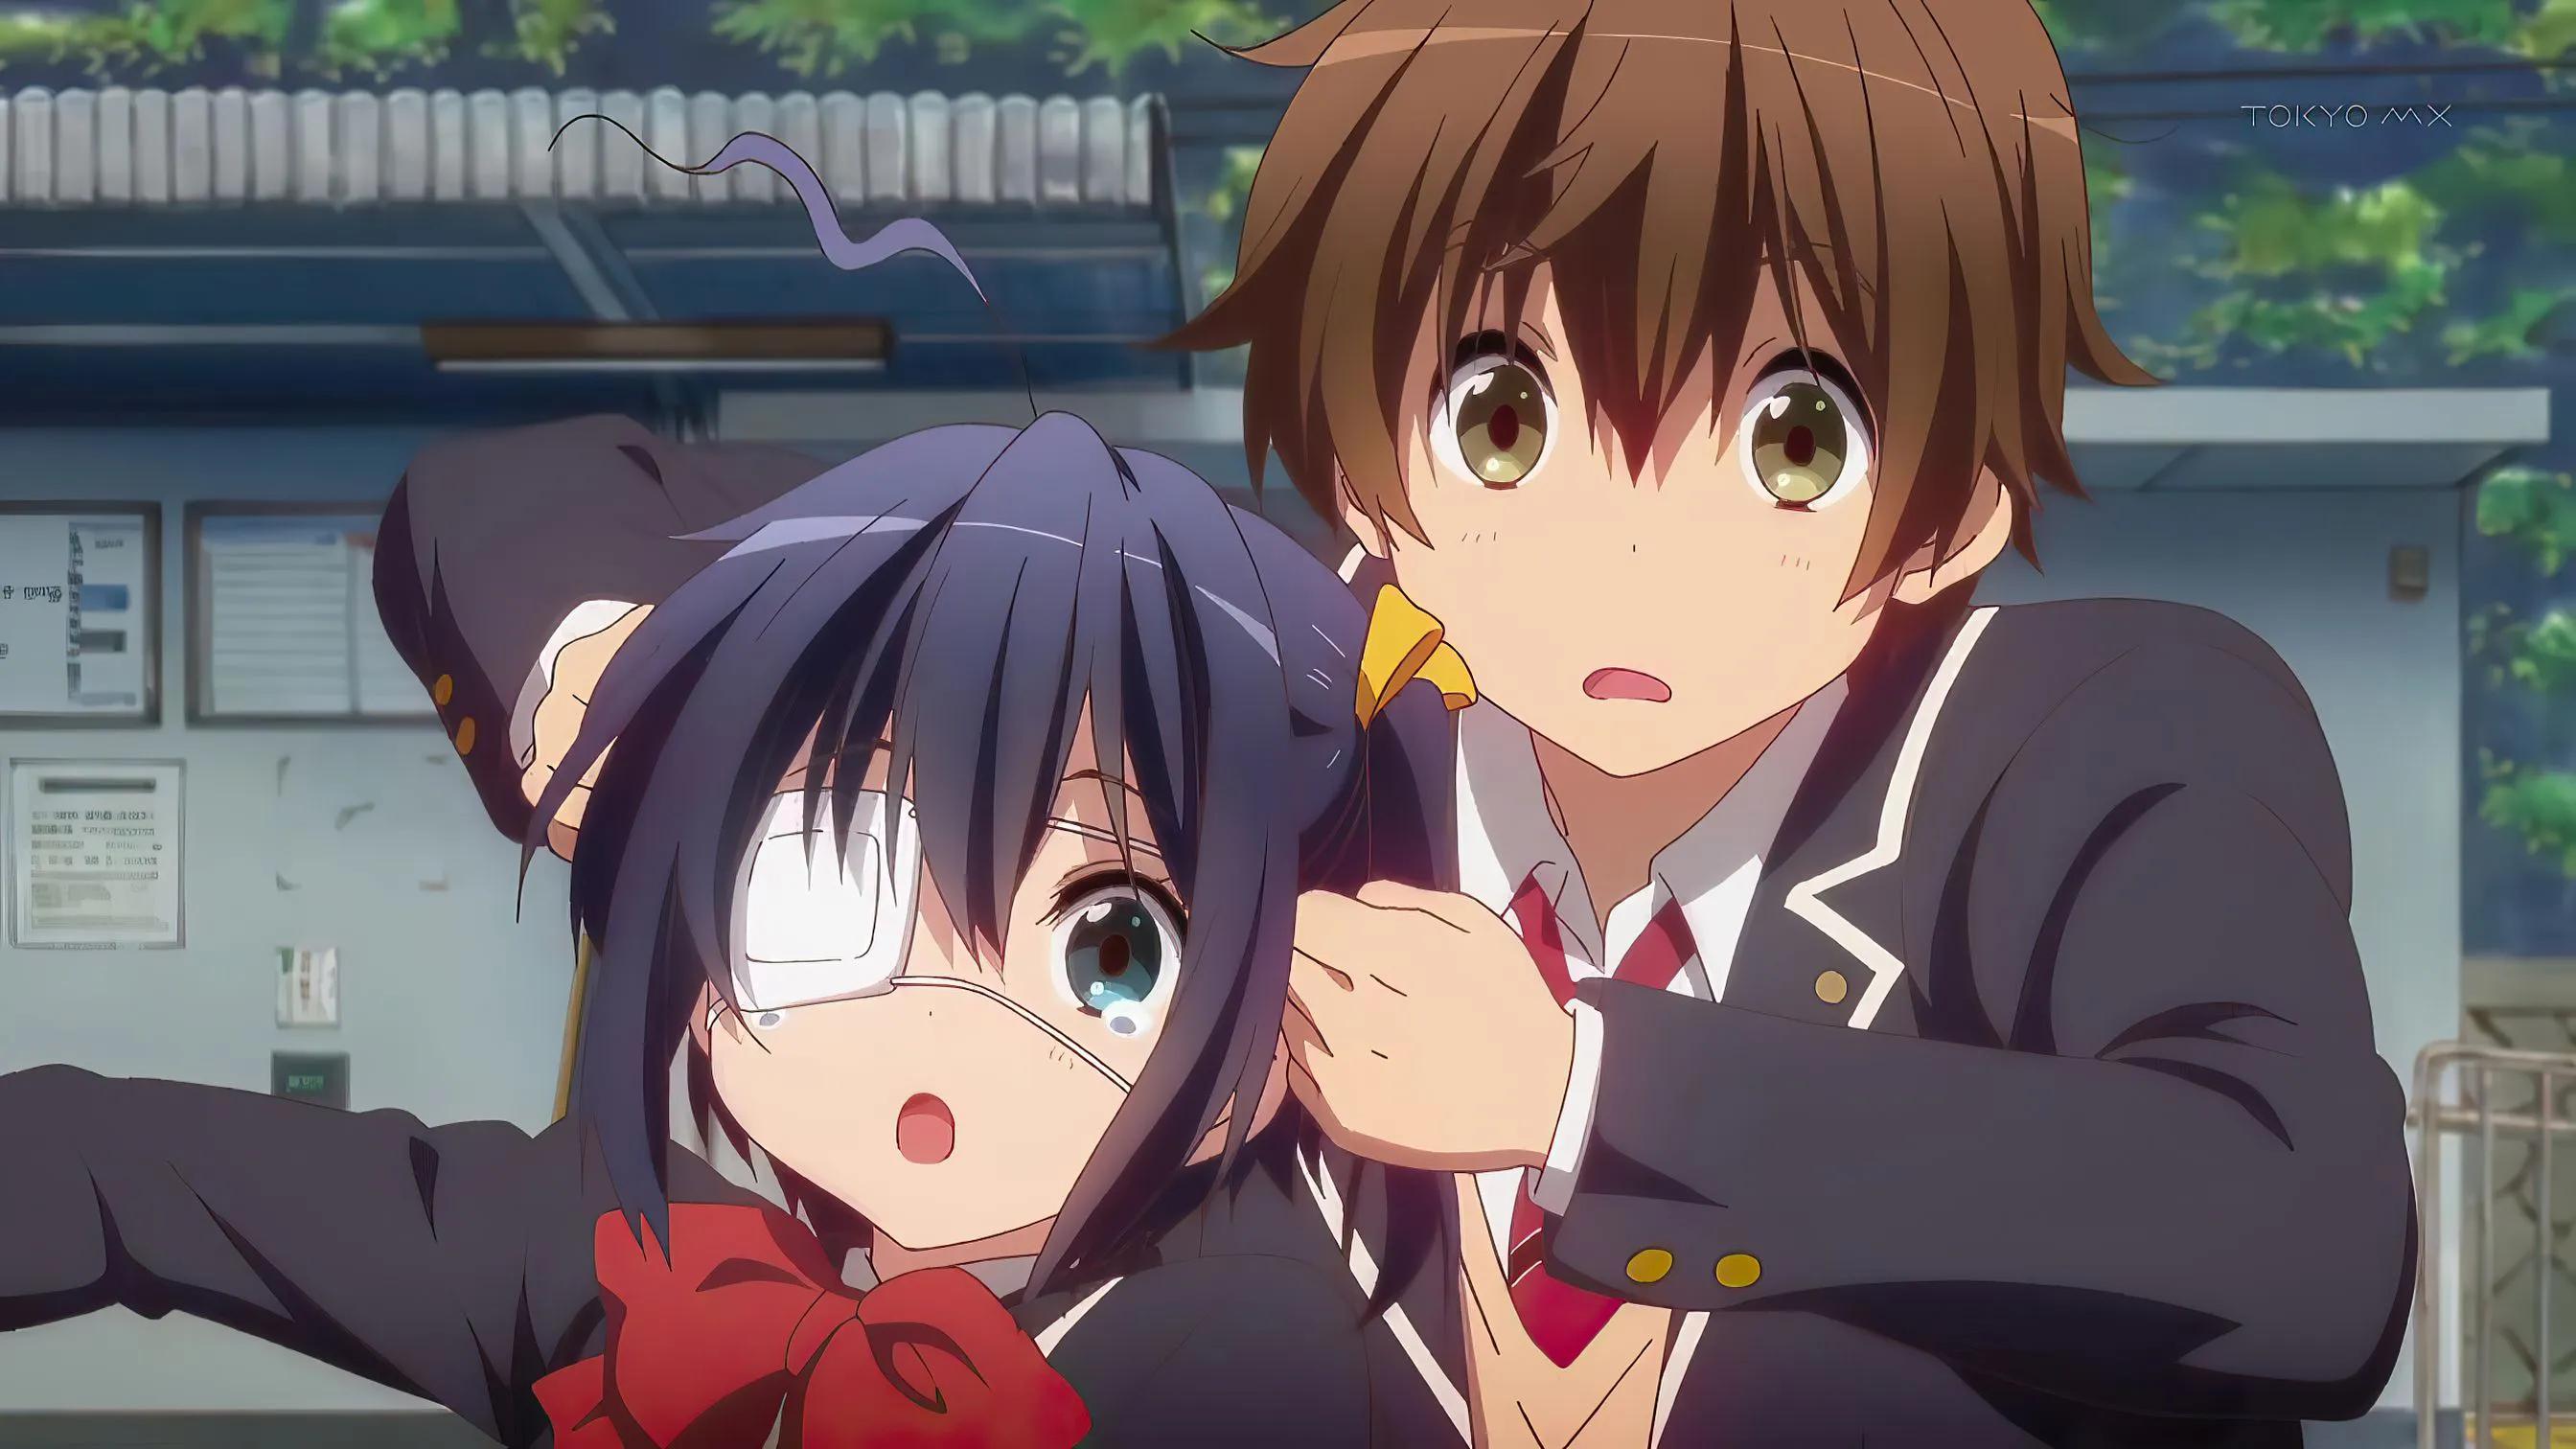 10 Awesome Love Anime Movies That Make You Believe in Love Again (Part 1) -  iMedia